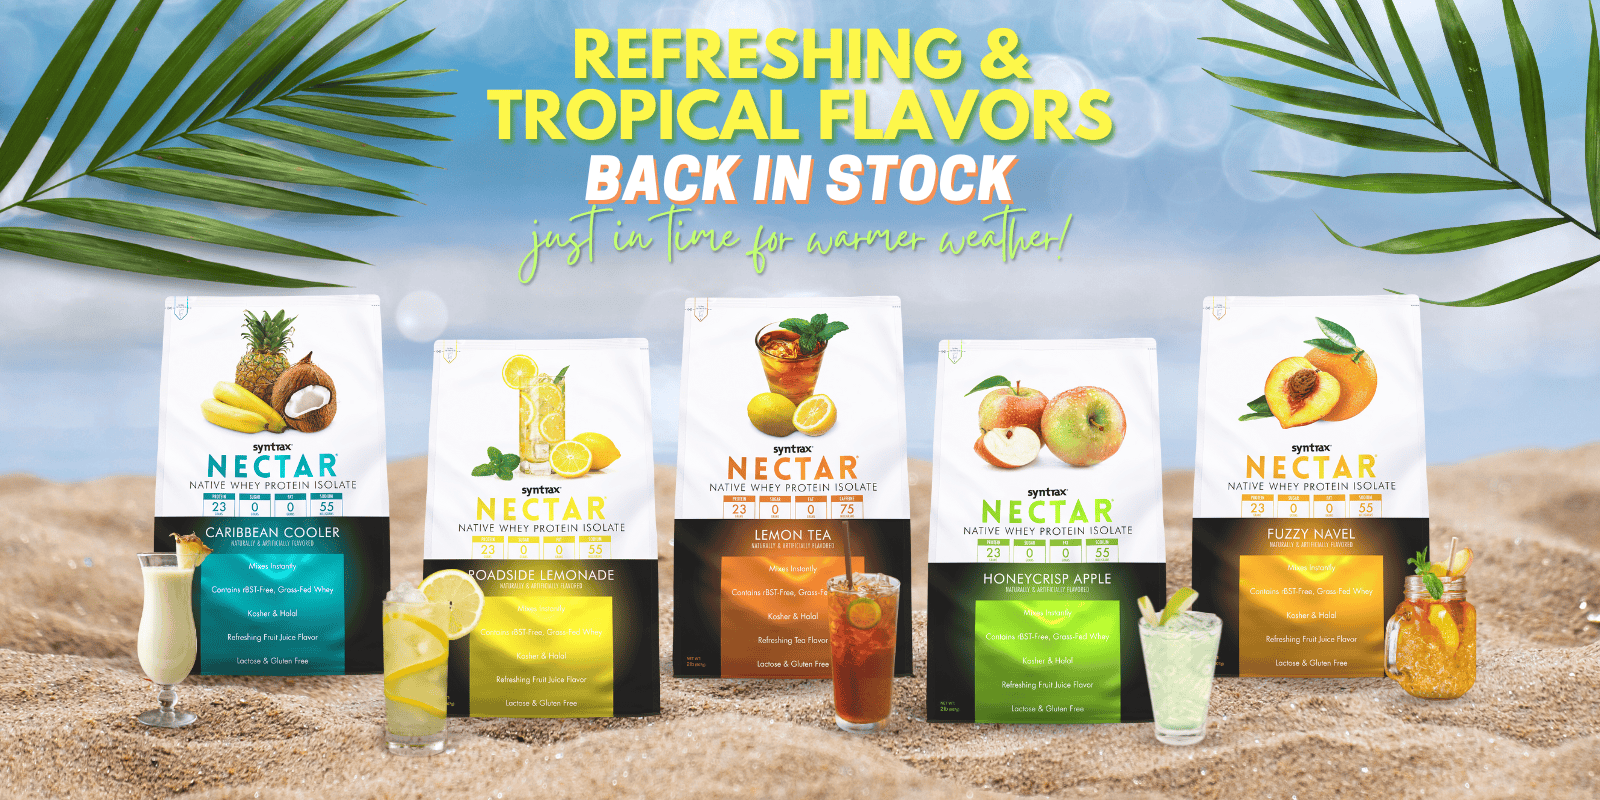 Nectar tropical flavors are Back in Stock